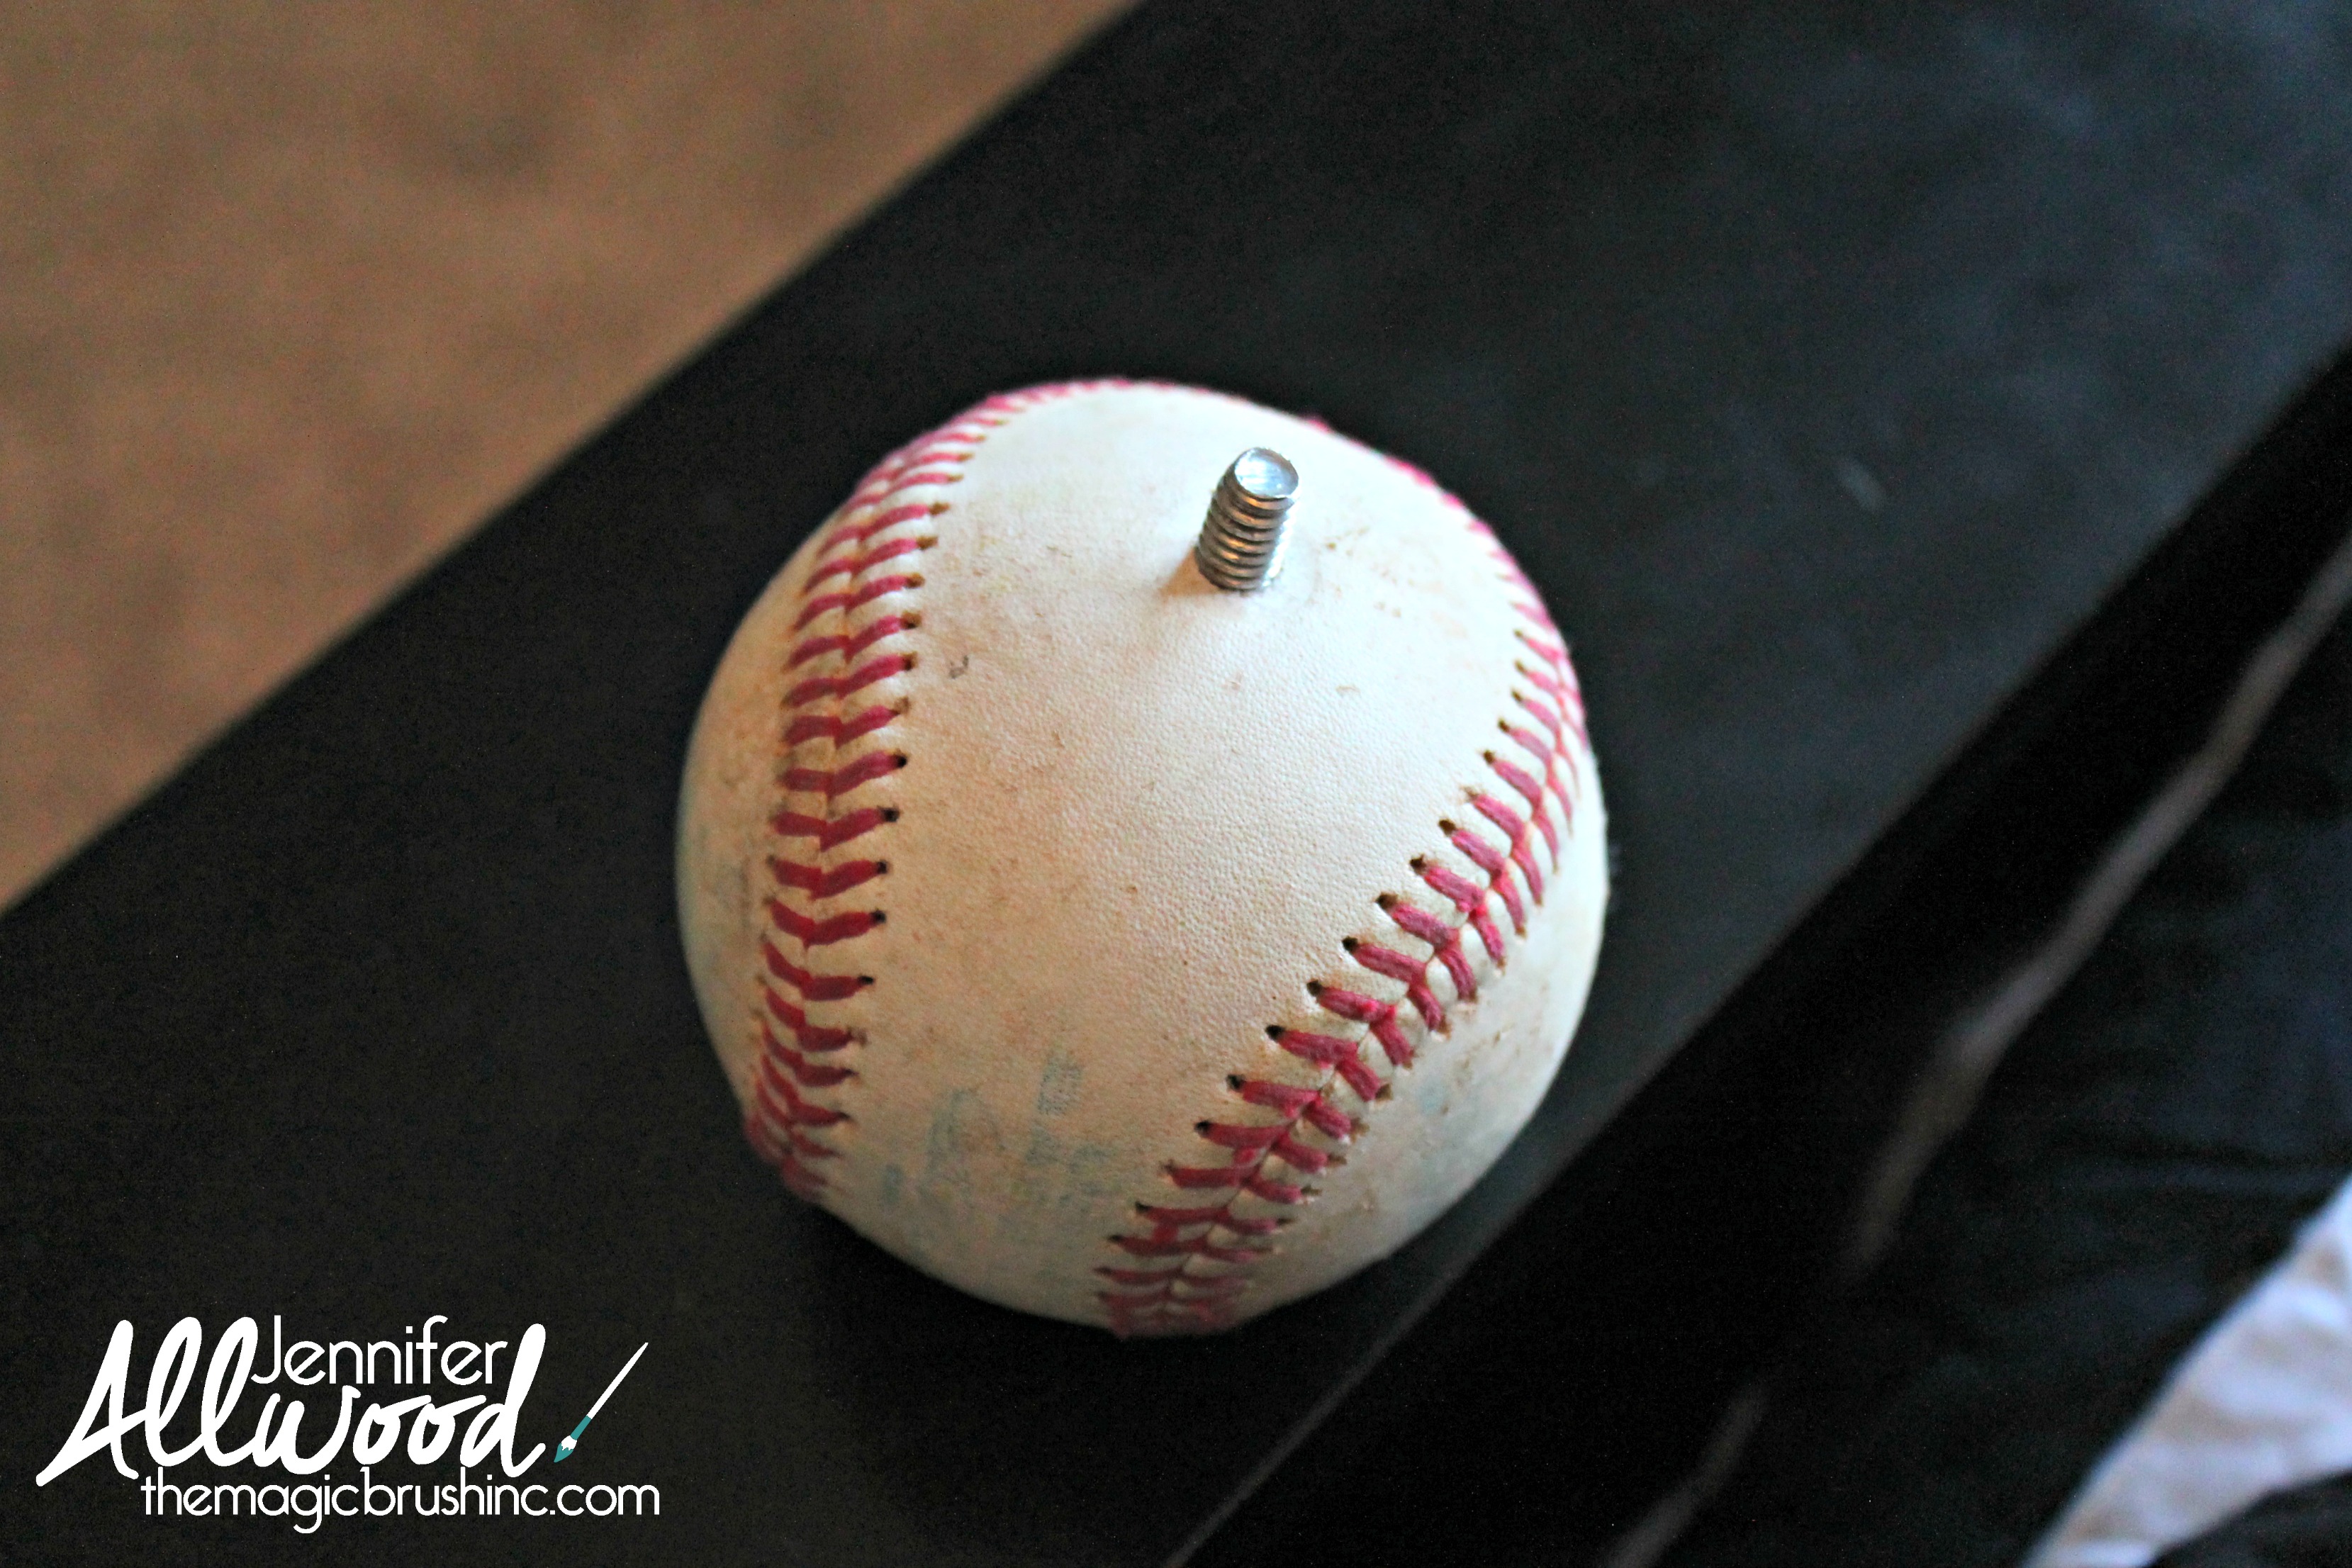 Details about   Rawlings Little League Baseball Finial Curtain Rod Cap Great Condition Too Cute! 